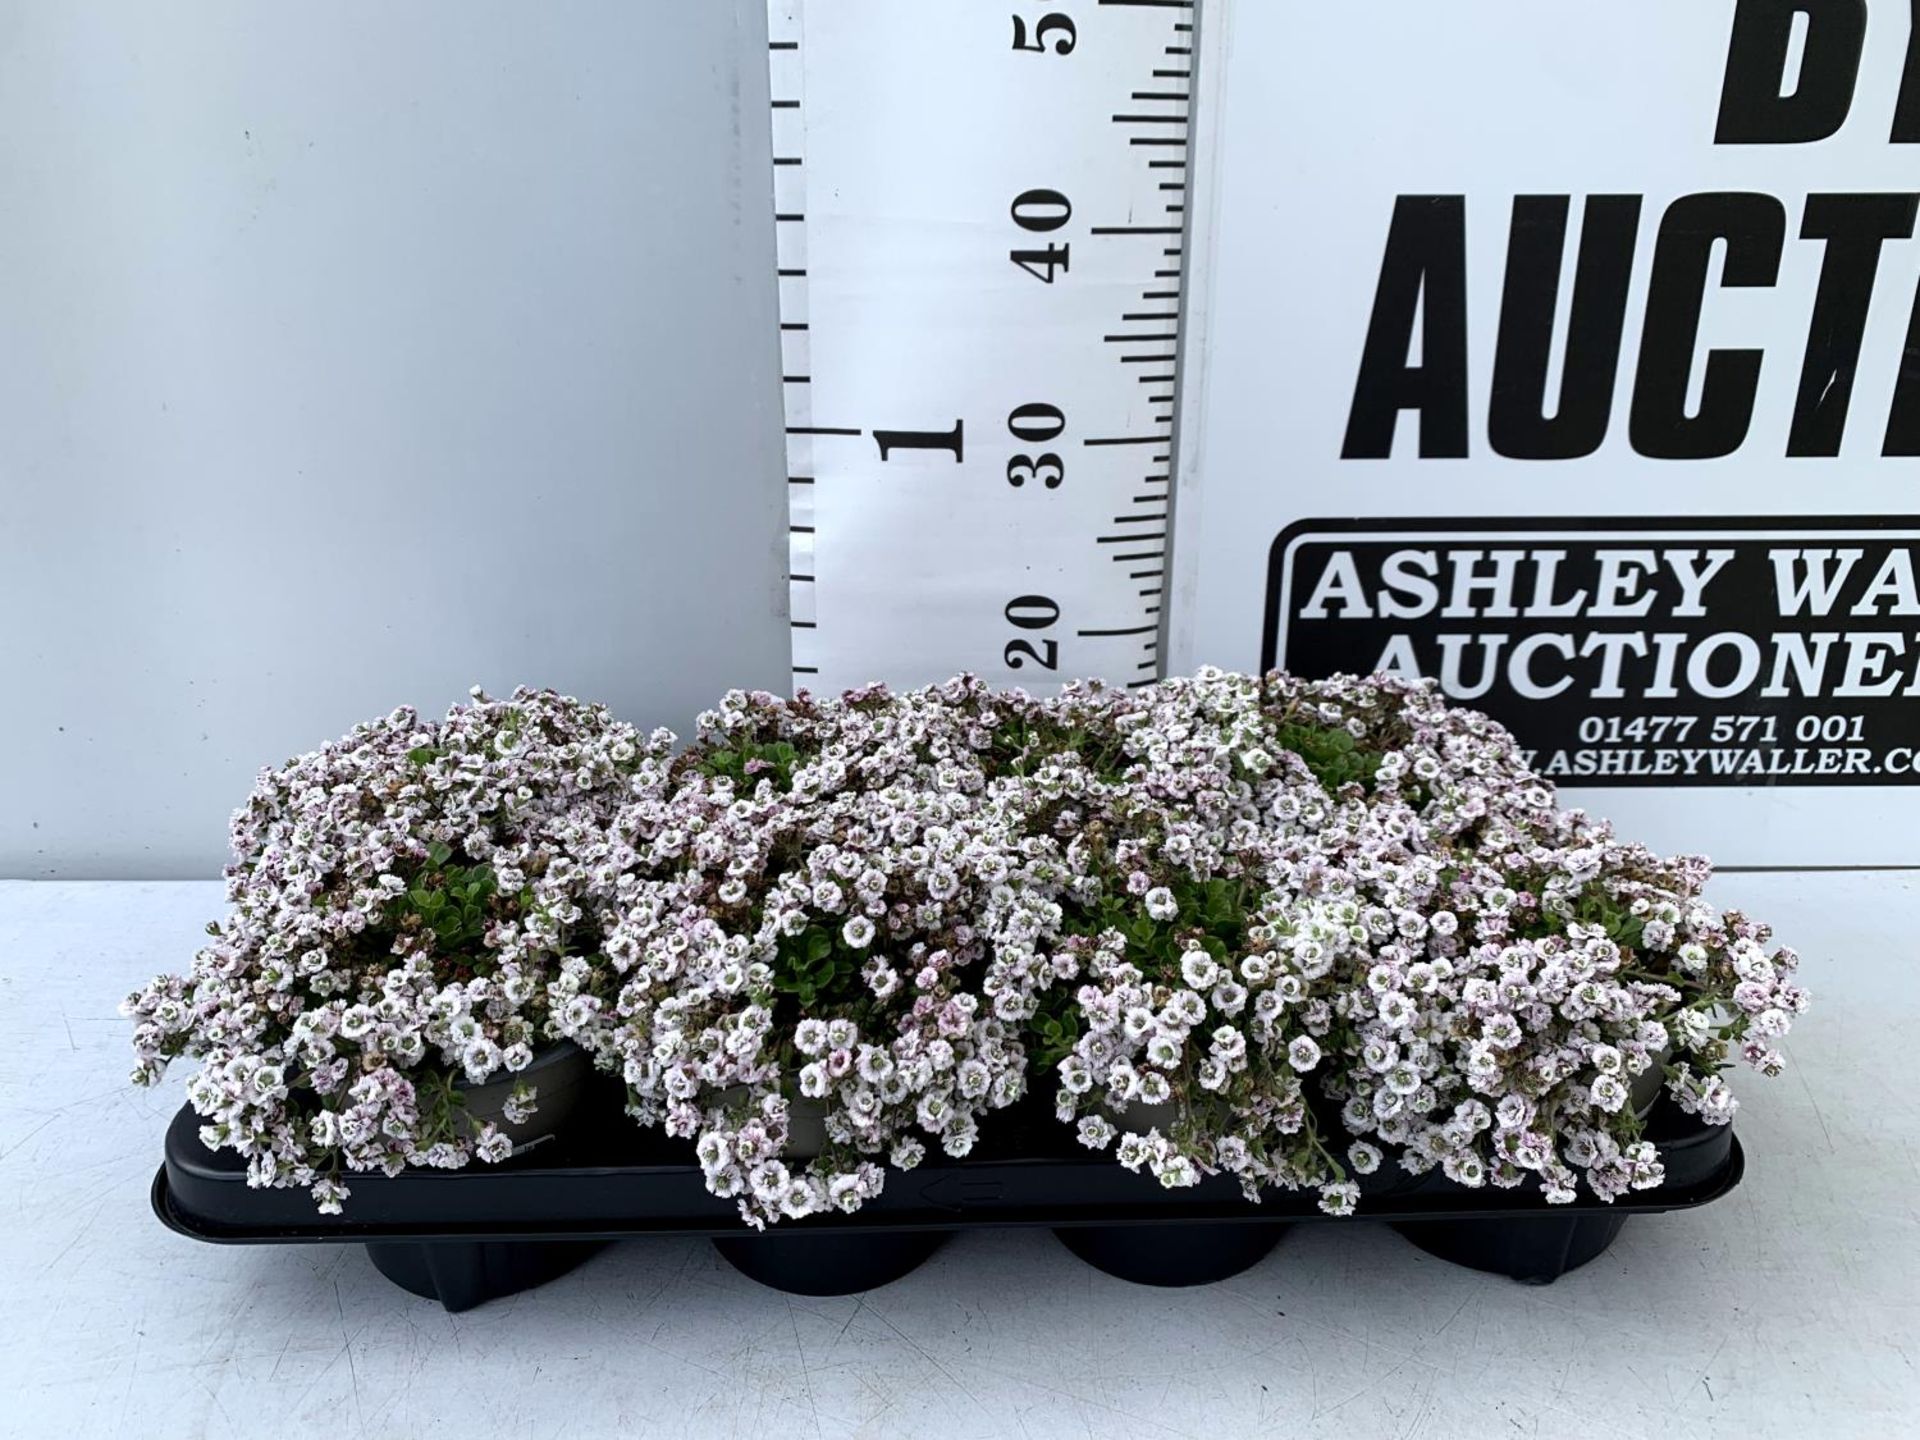 EIGHT GYPSOPHILA CERASTIOIDES PLENA WHITE IN 1 LTR POTS APPROX 20CM IN HEIGHT PLUS VAT TO BE SOLD